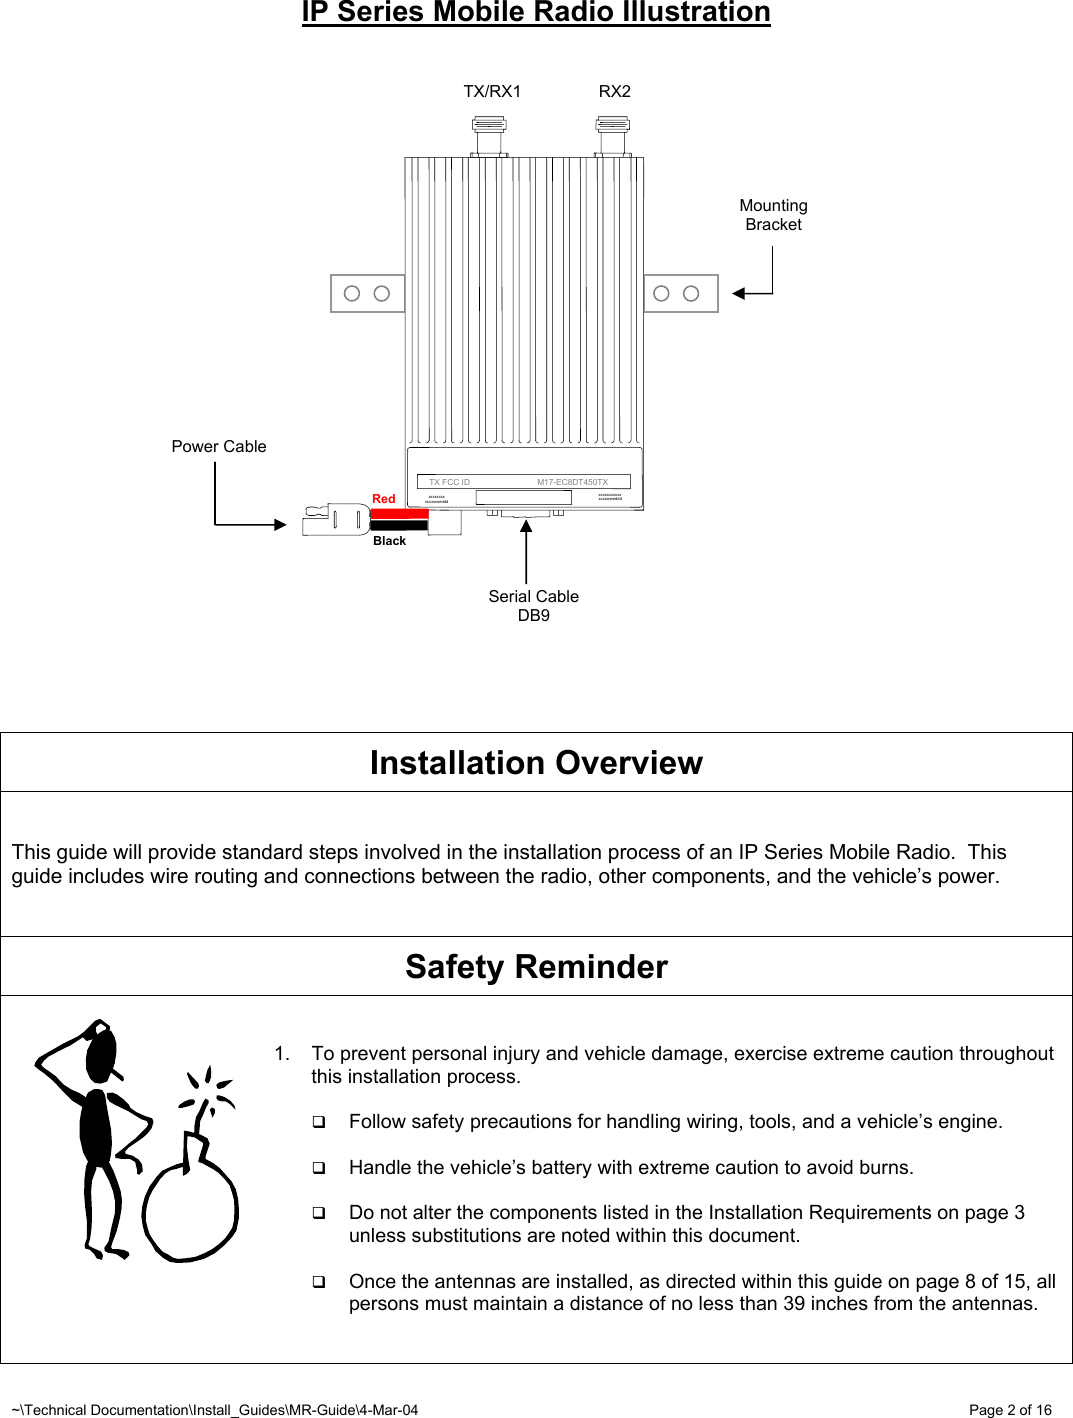 ~\Technical Documentation\Install_Guides\MR-Guide\4-Mar-04   Page 2 of 16 IP Series Mobile Radio Illustration                      Installation Overview   This guide will provide standard steps involved in the installation process of an IP Series Mobile Radio.  This guide includes wire routing and connections between the radio, other components, and the vehicle’s power.    Safety Reminder   1.  To prevent personal injury and vehicle damage, exercise extreme caution throughout this installation process.   Follow safety precautions for handling wiring, tools, and a vehicle’s engine.   Handle the vehicle’s battery with extreme caution to avoid burns.   Do not alter the components listed in the Installation Requirements on page 3 unless substitutions are noted within this document.   Once the antennas are installed, as directed within this guide on page 8 of 15, all persons must maintain a distance of no less than 39 inches from the antennas.       Black Red   TX/RX1  RX2 Serial Cable DB9 Power Cable  Mounting Bracket      TX FCC ID                             M17-EC8DT450TX xxxxxxxx xxx xxxxwweddd xxxxxxxx xxxxwweddd 